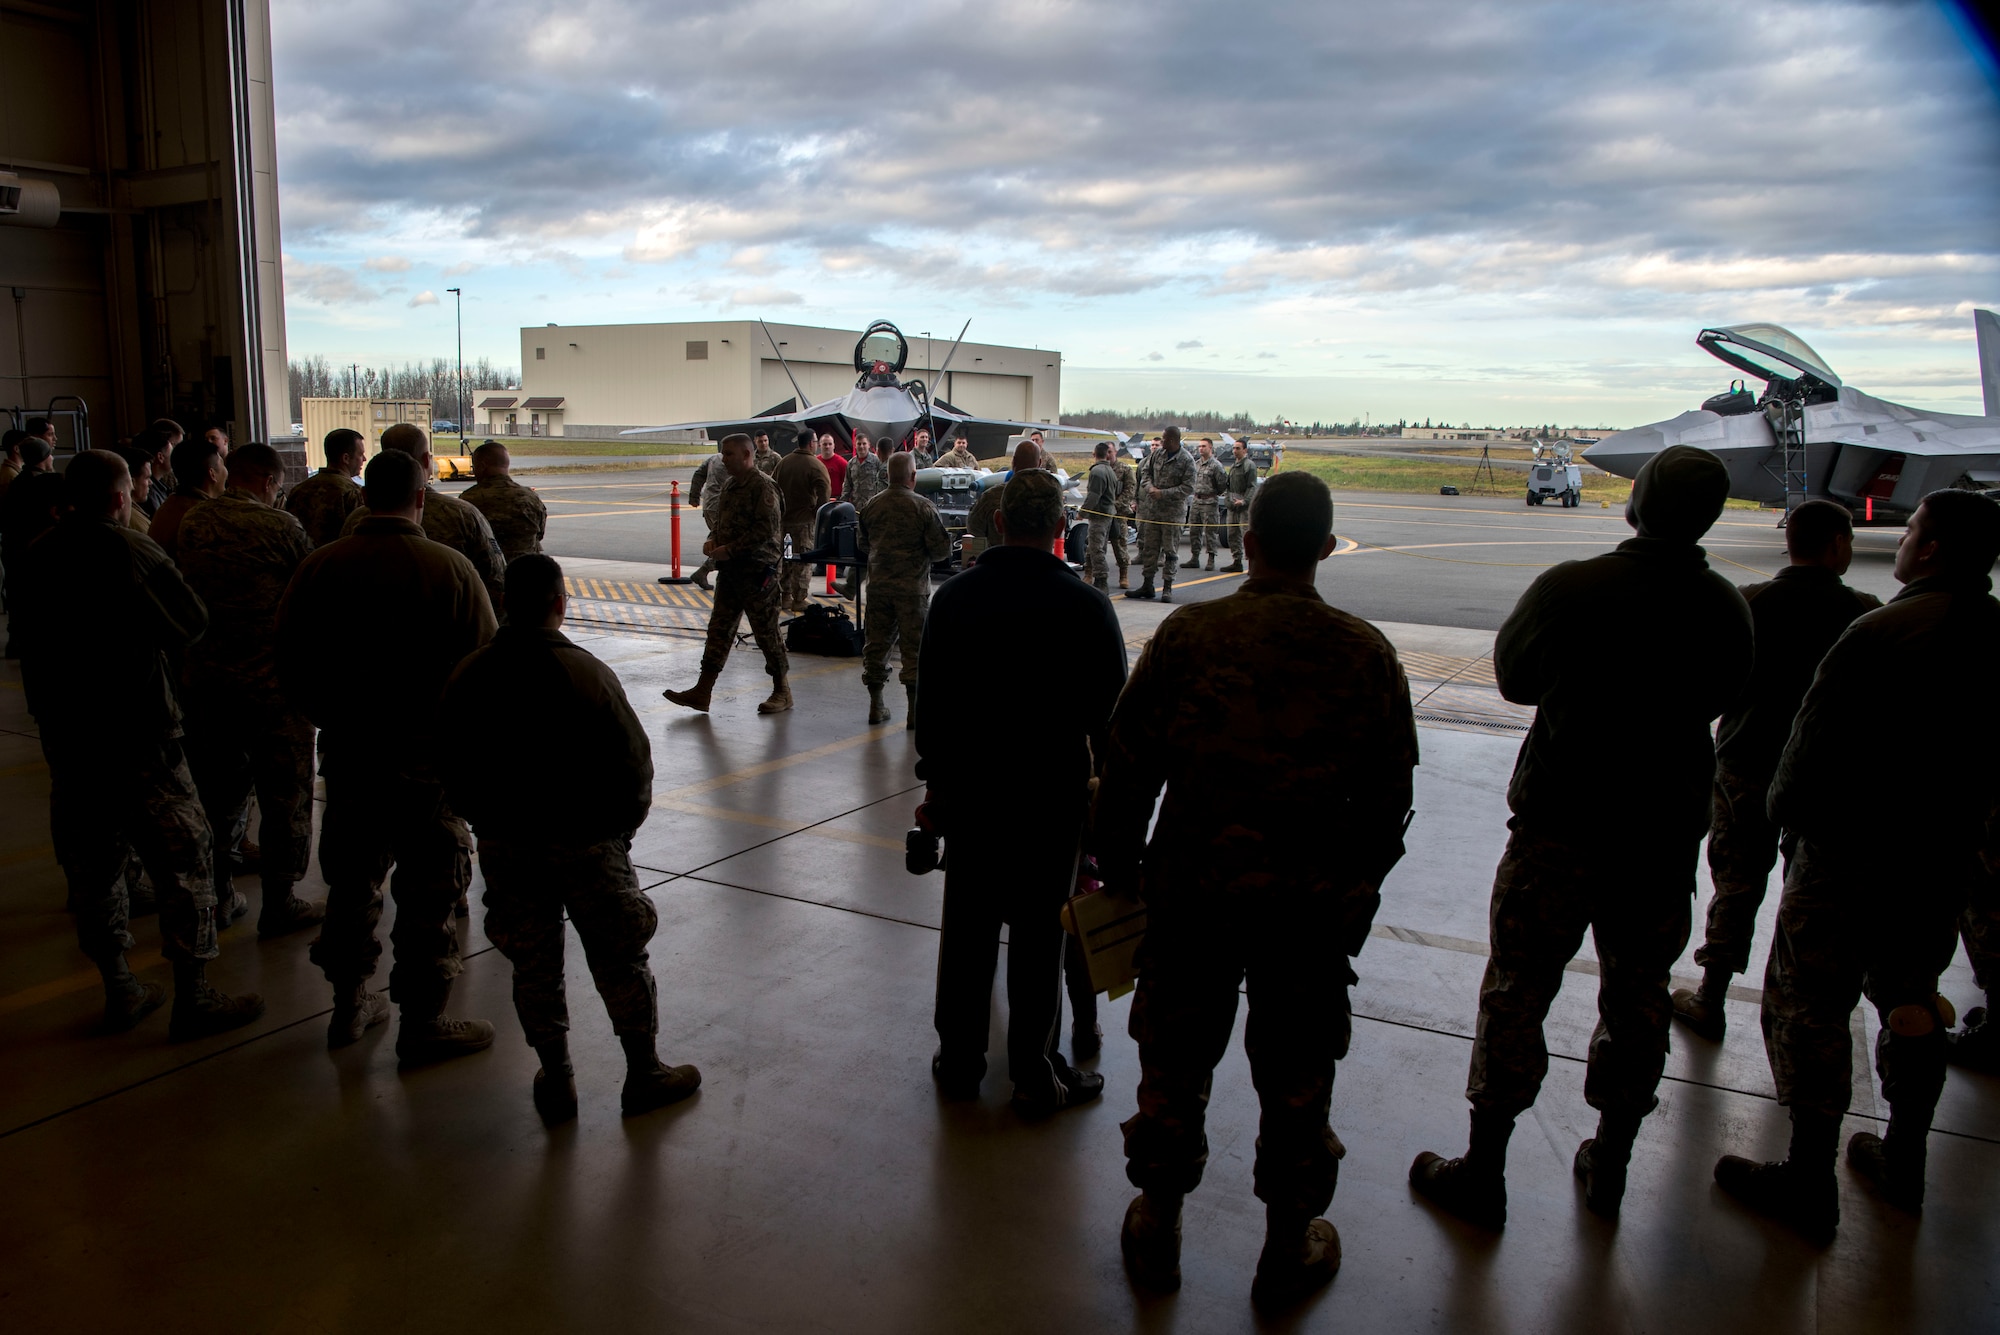 Attendees gathered to watch service members from the 525th and 90th aircraft maintenance units compete during the quarterly load competition at Joint Base Elmendorf-Richardson, Alaska, Oct. 26, 2018. During the competition two teams tested their skills as load crew members for the F-22 Raptor aircraft. The event demonstrates the skill level and knowledge of all JBER aircraft maintainers.